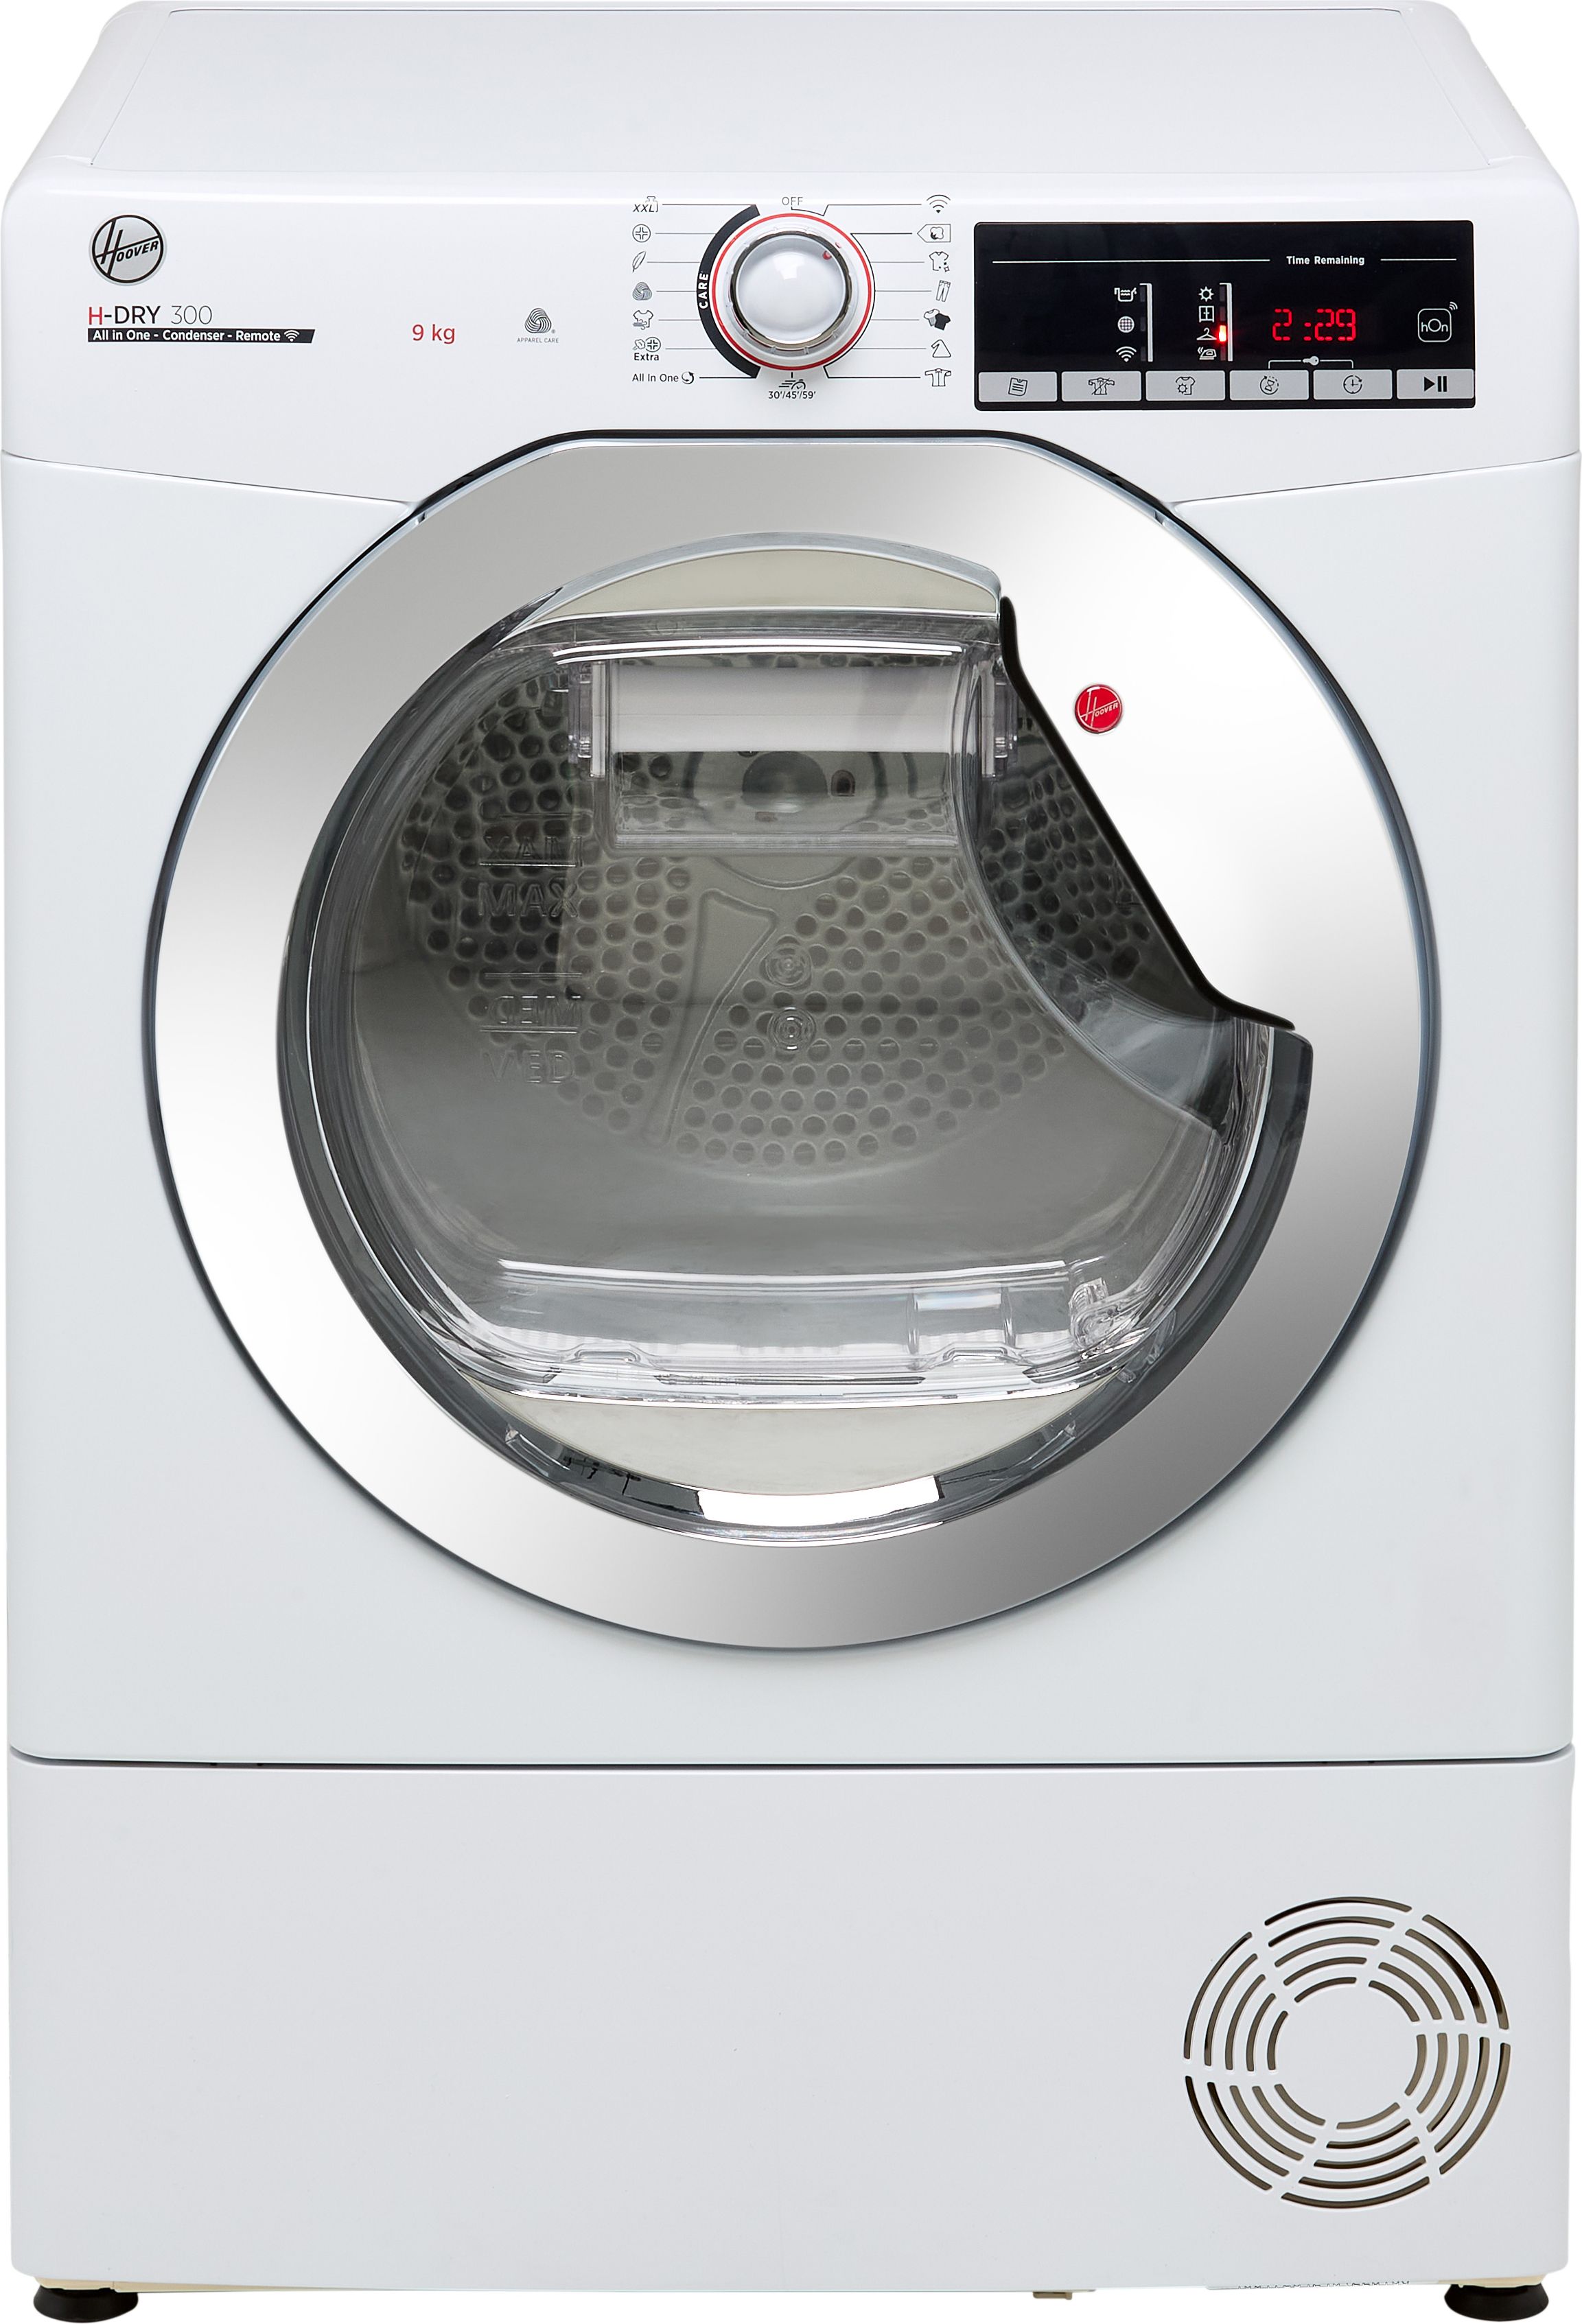 Hoover H-DRY 300 HLEC9TCE 9Kg Condenser Tumble Dryer - White - B Rated, White